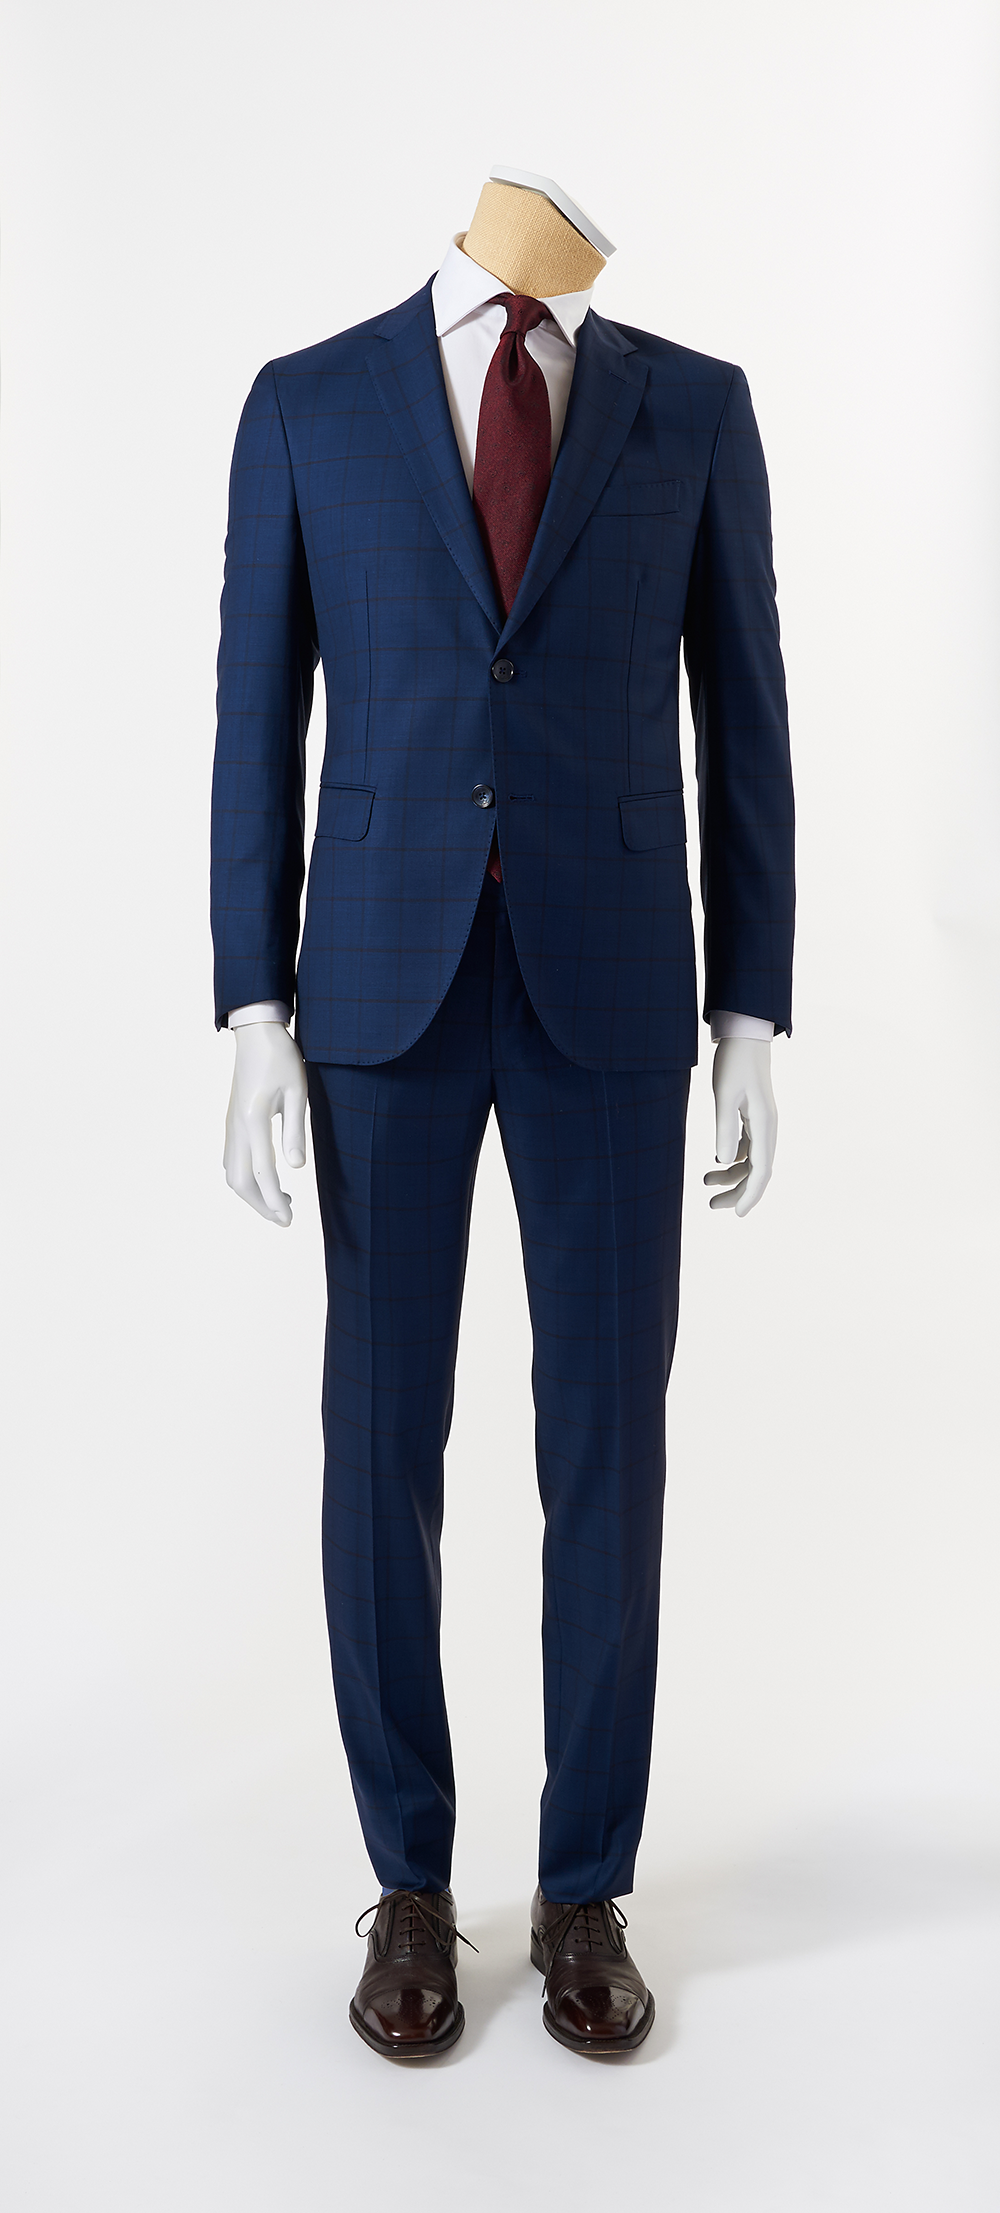 Calvaresi Suit - Royal Blue with Navy Check